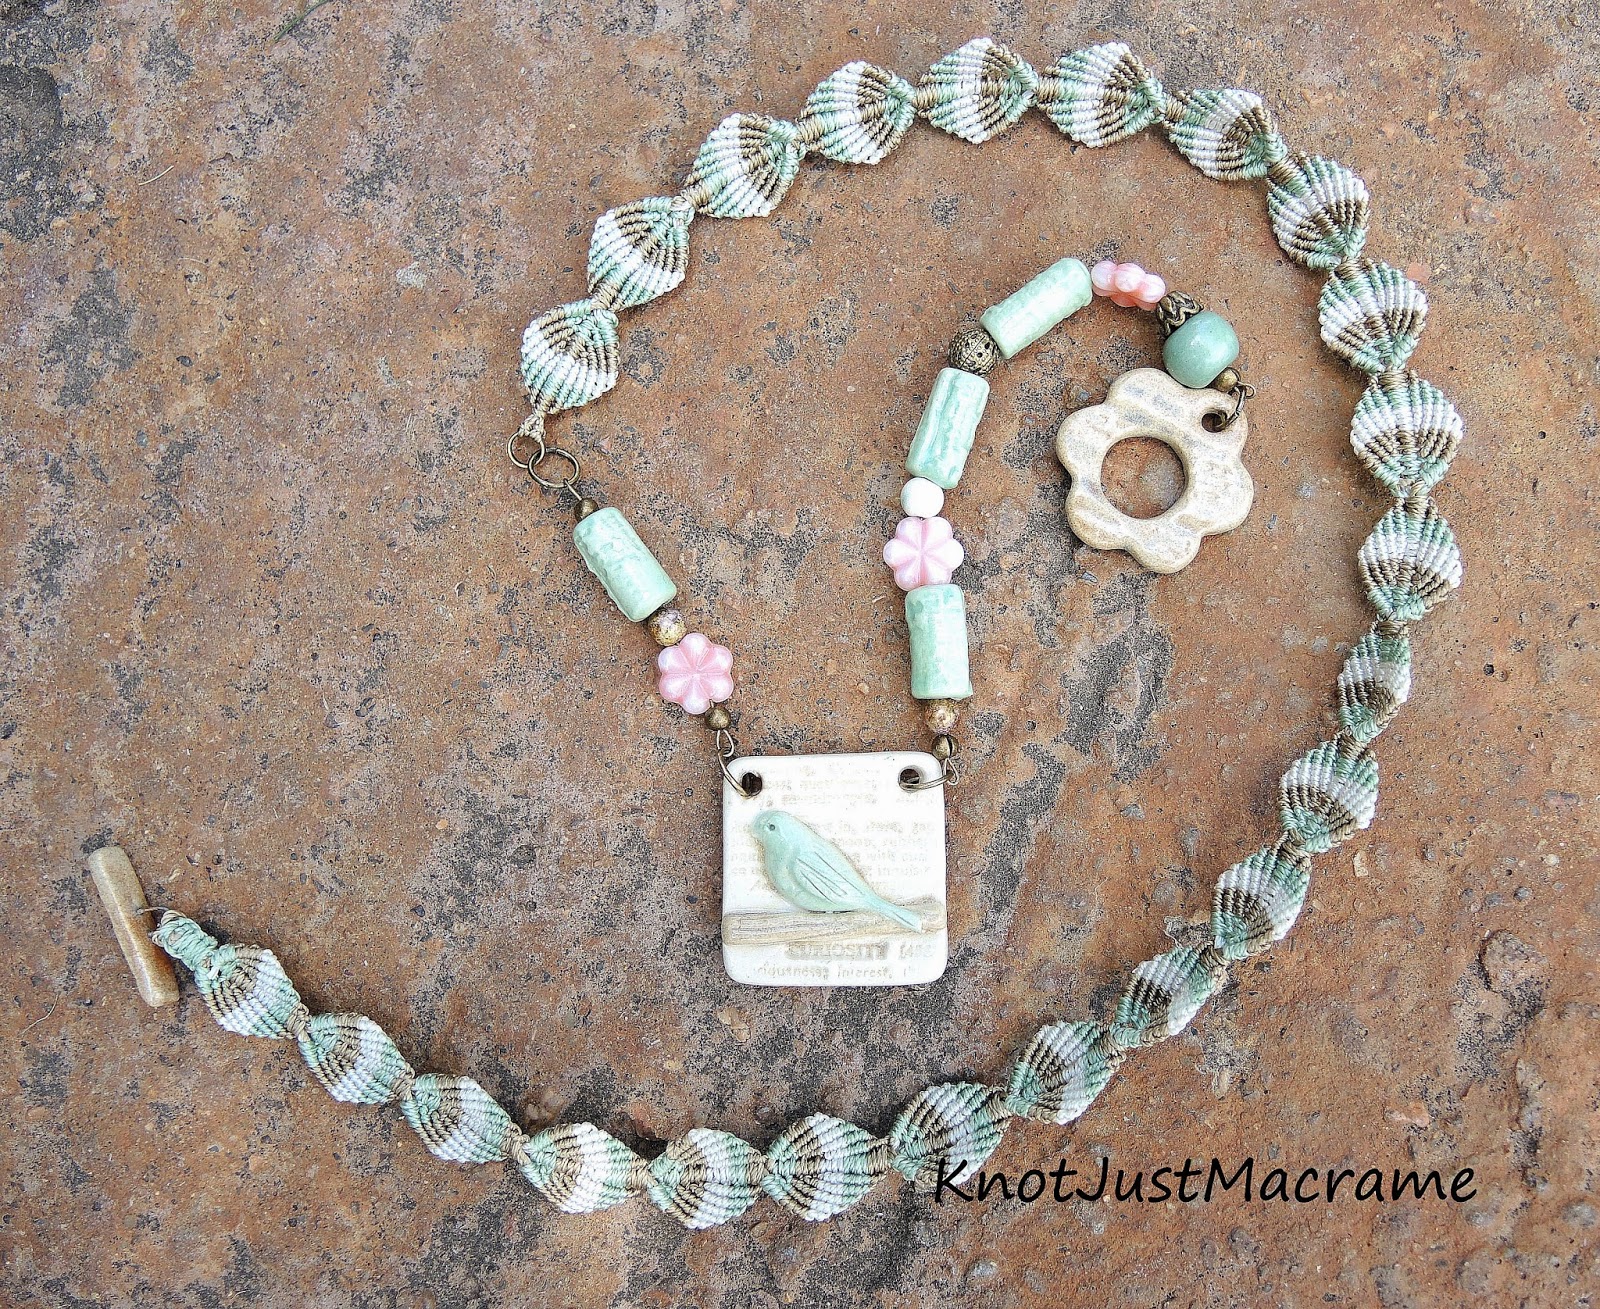 Necklace with micro macrame by Knot Just Macrame with Blu Mudd ceramic components.